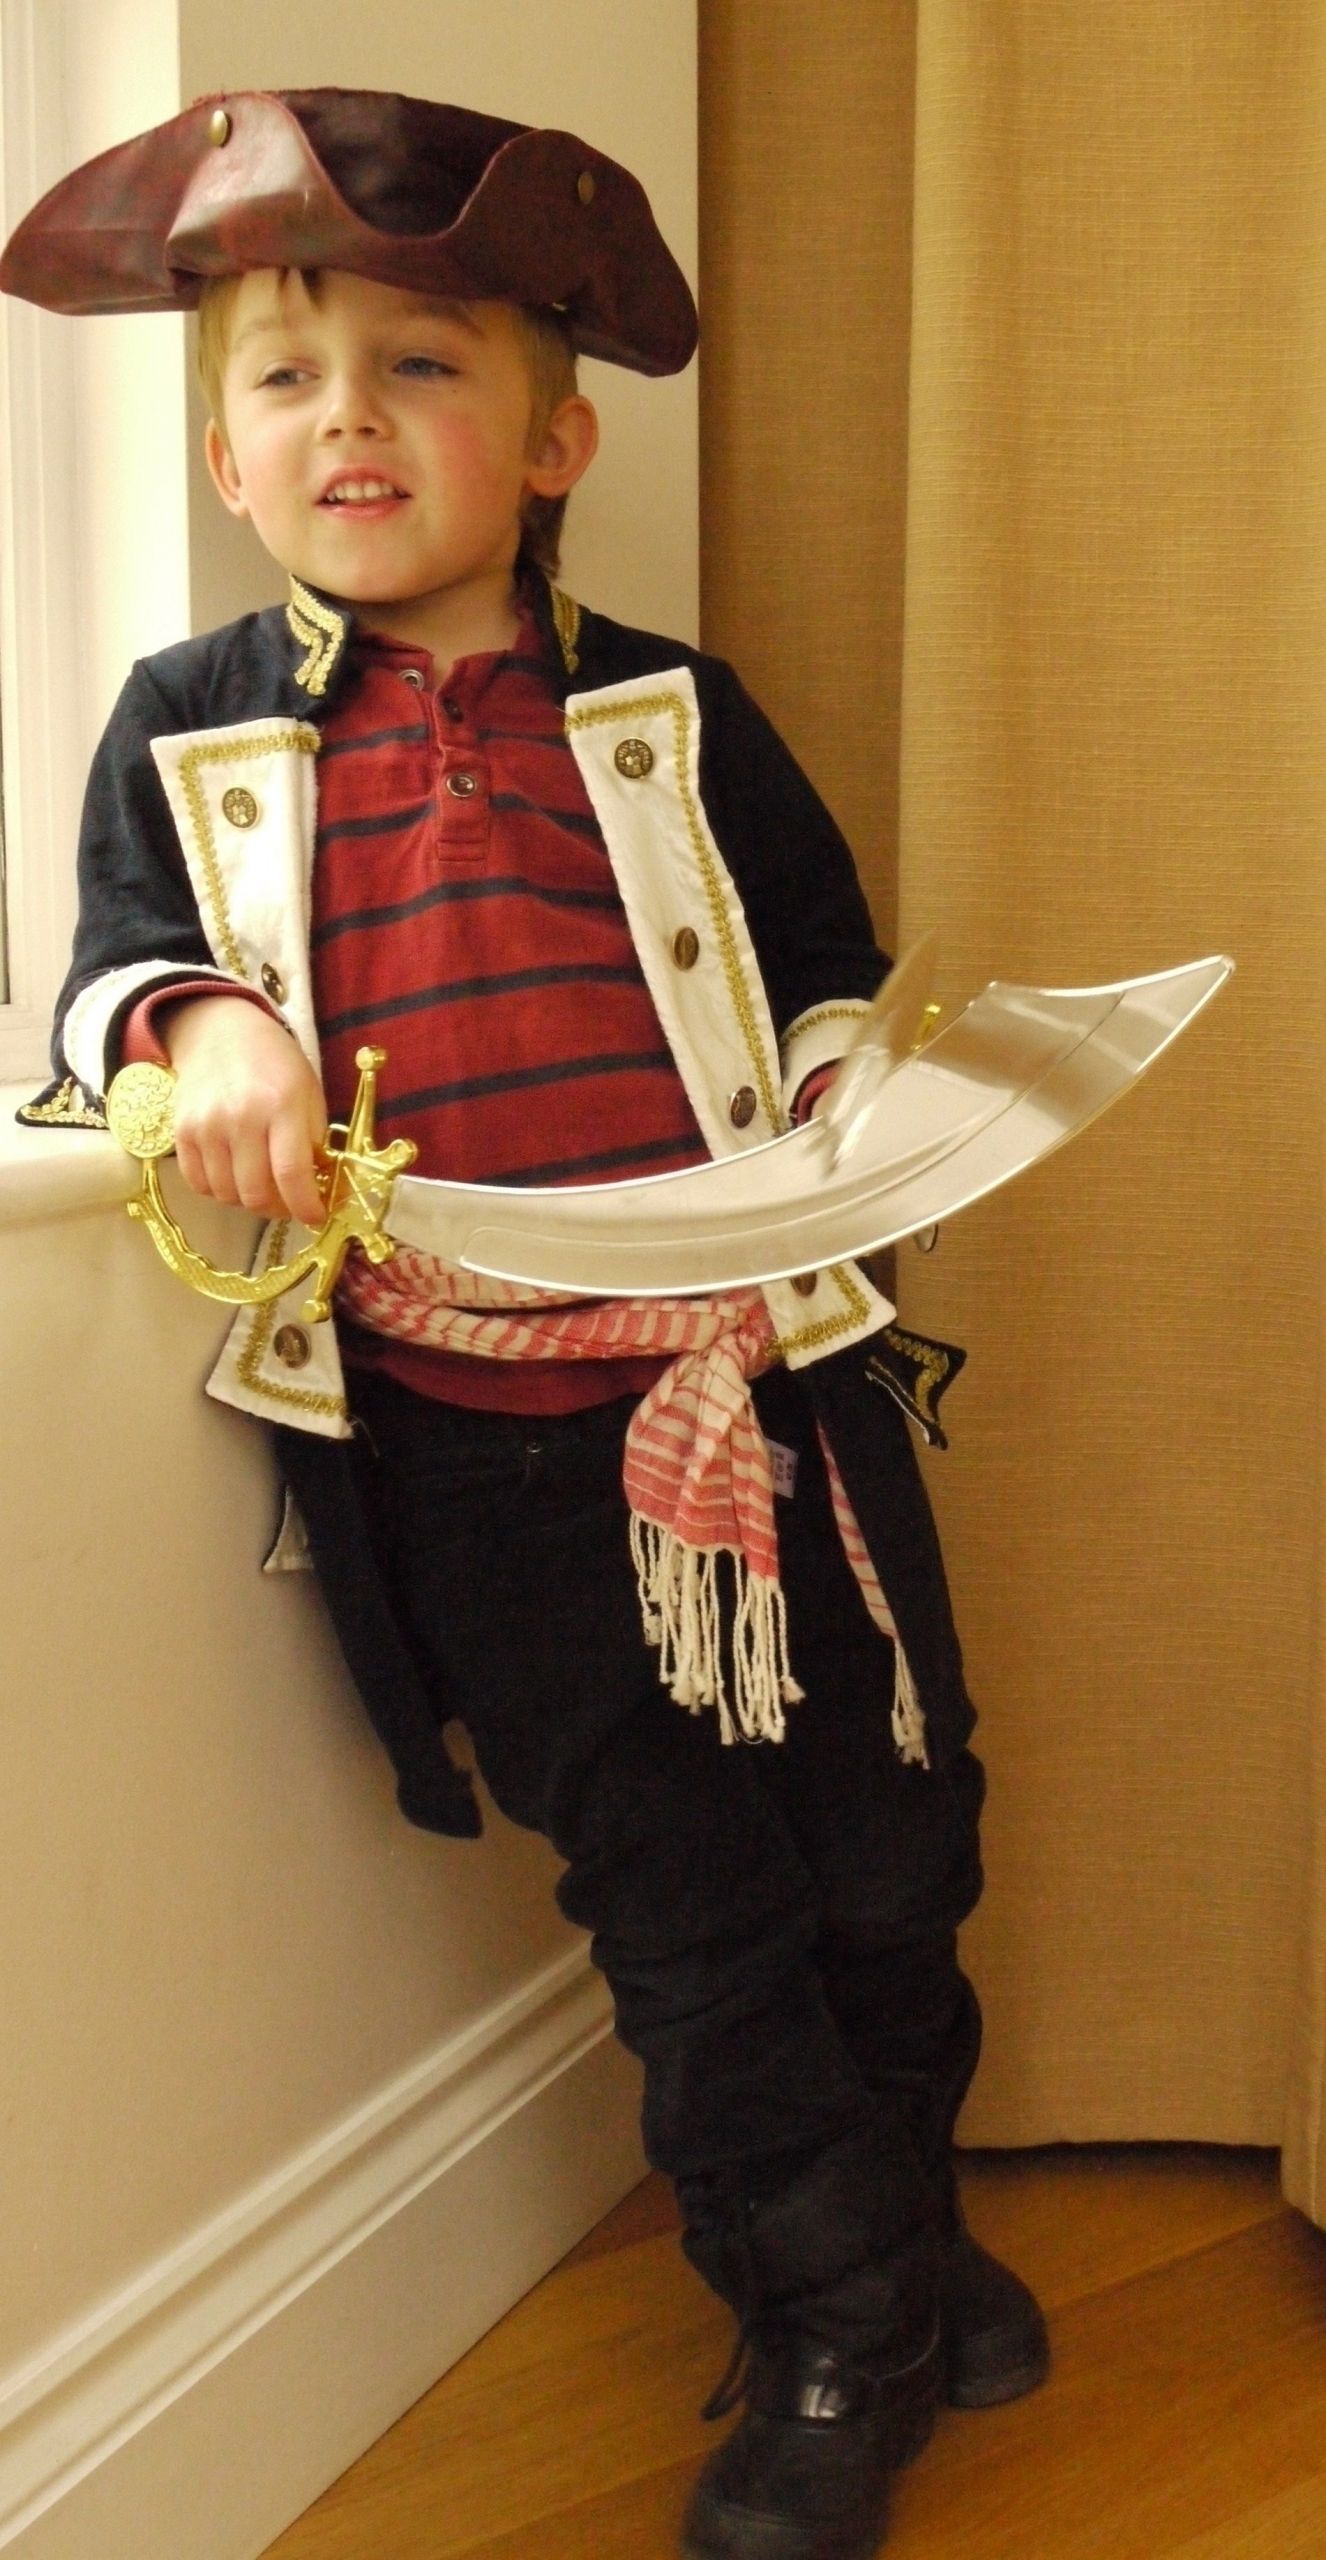 Easy DIY Pirate Costume
 10 Attractive Homemade Pirate Costume Ideas For Kids 2019